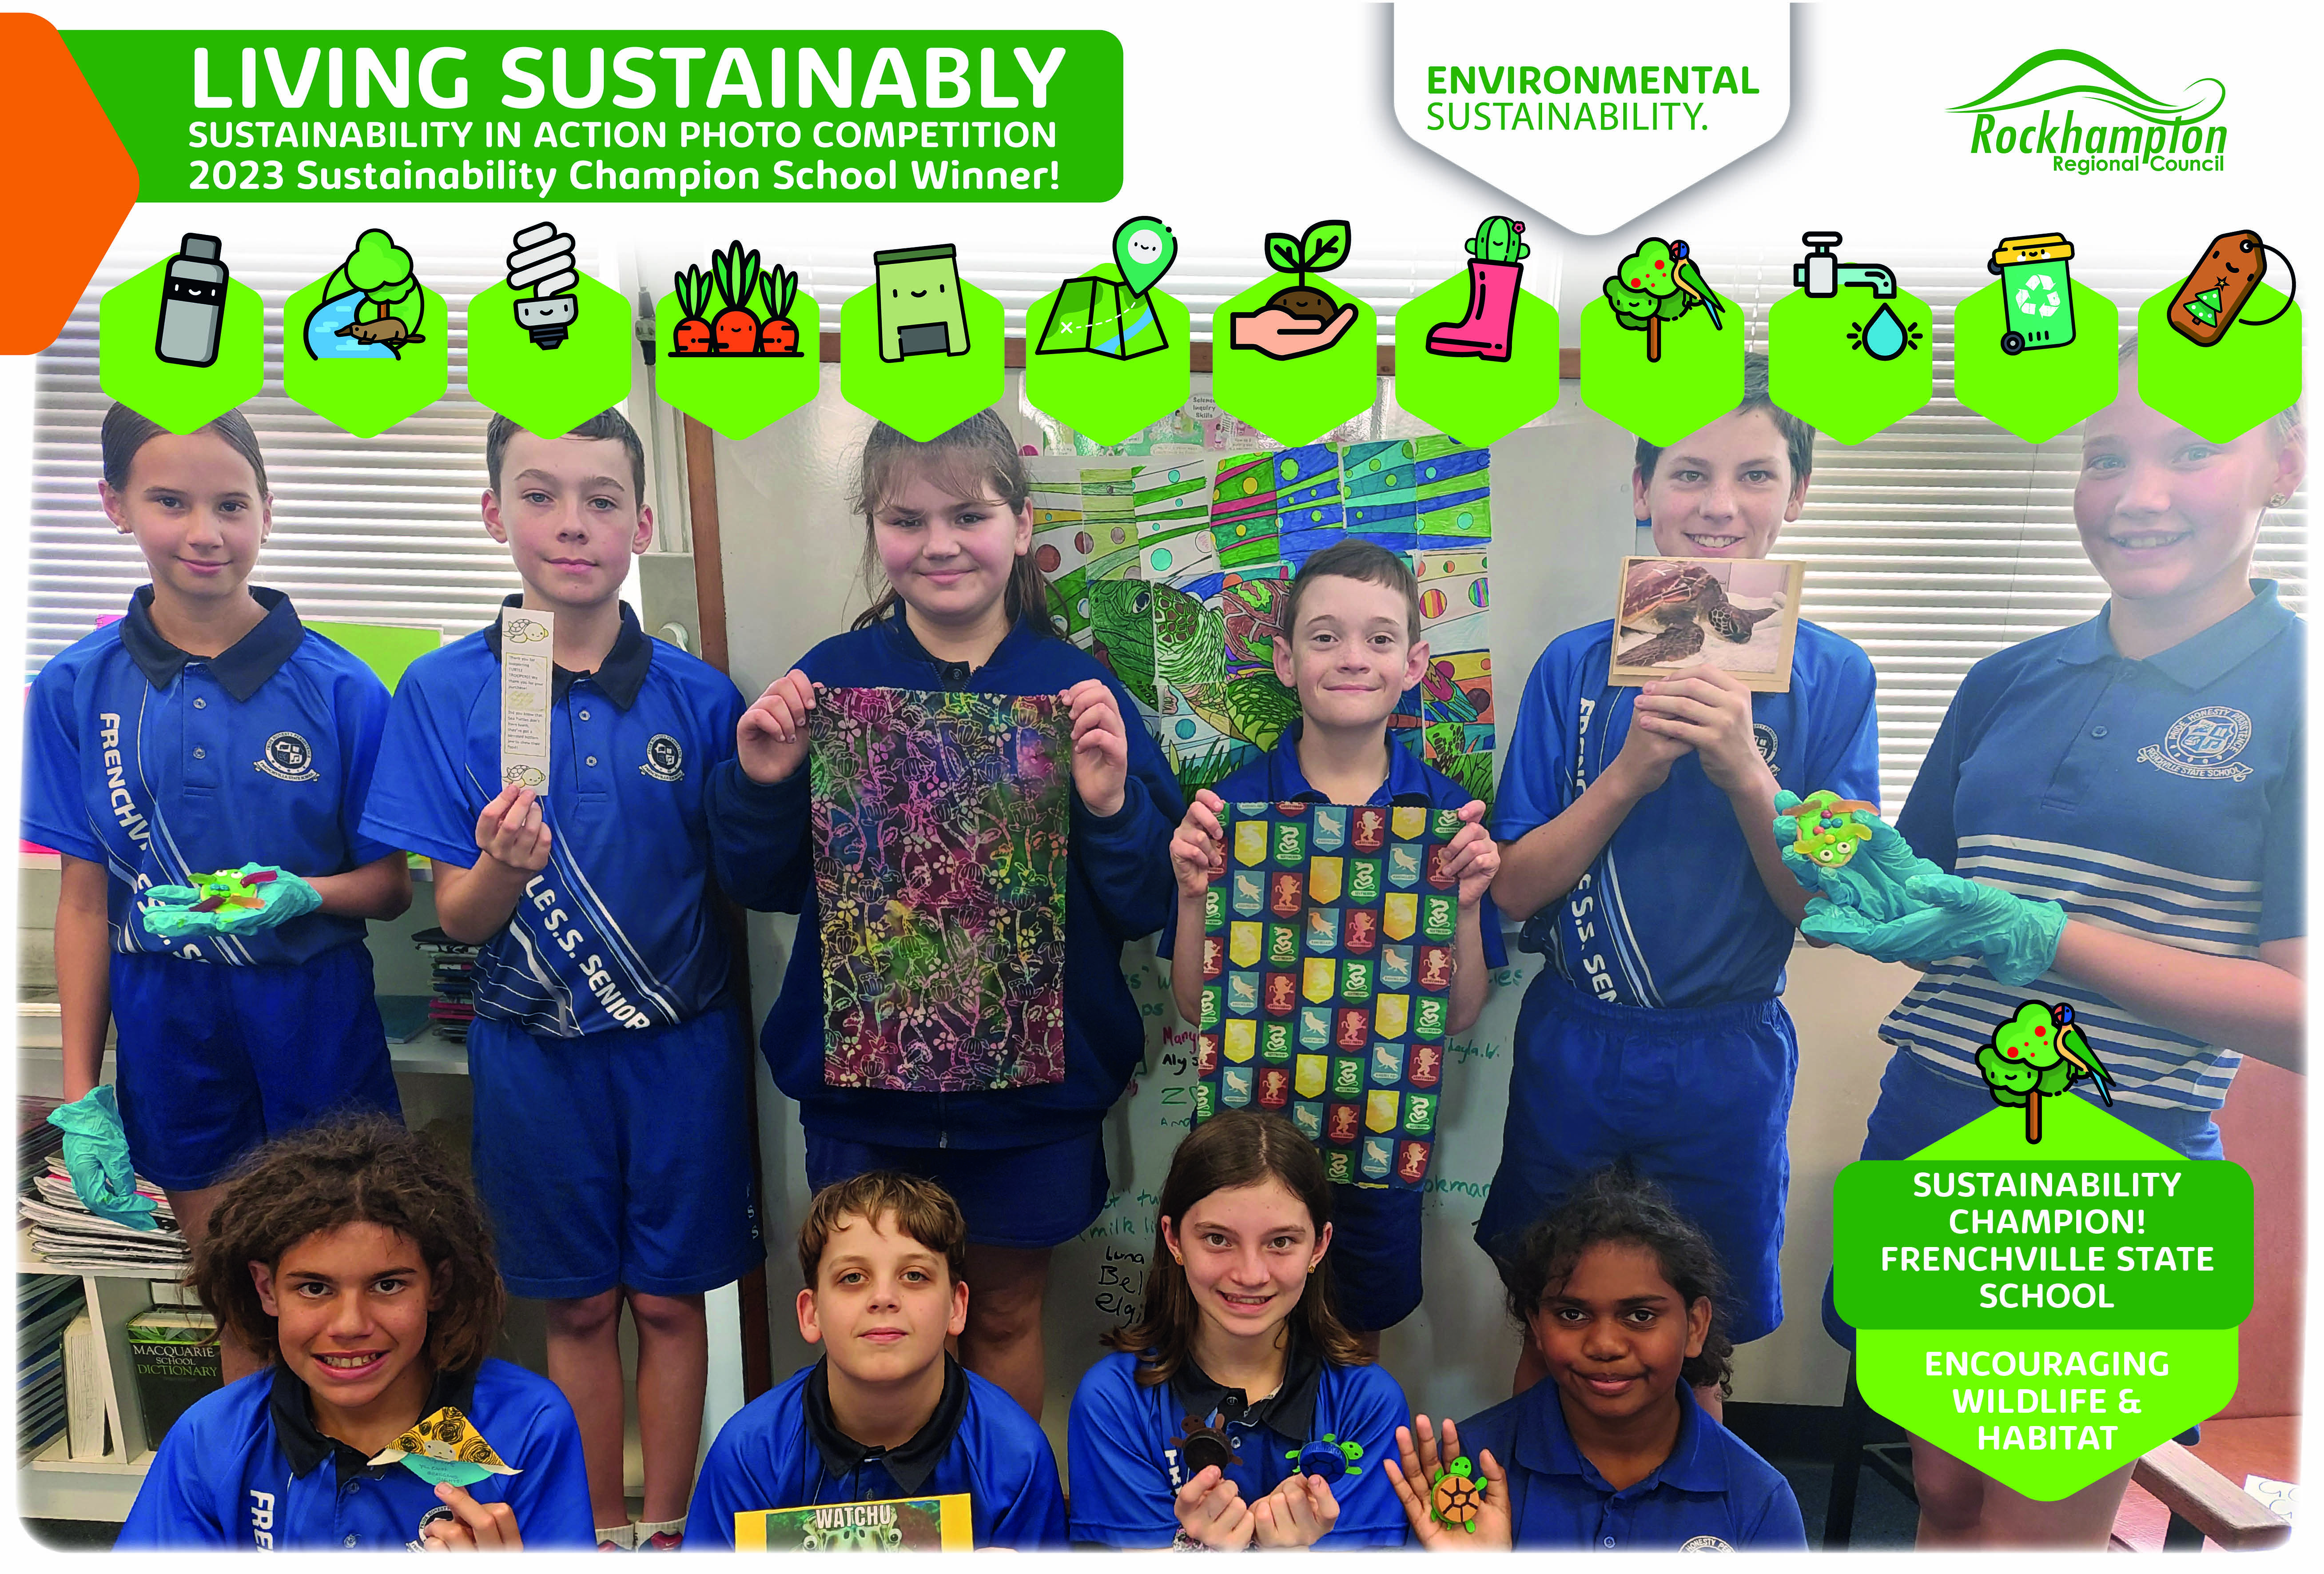 2023-SCHOOL-Sustainability-in-Action-Photo-Comp-Frenchville-State-School